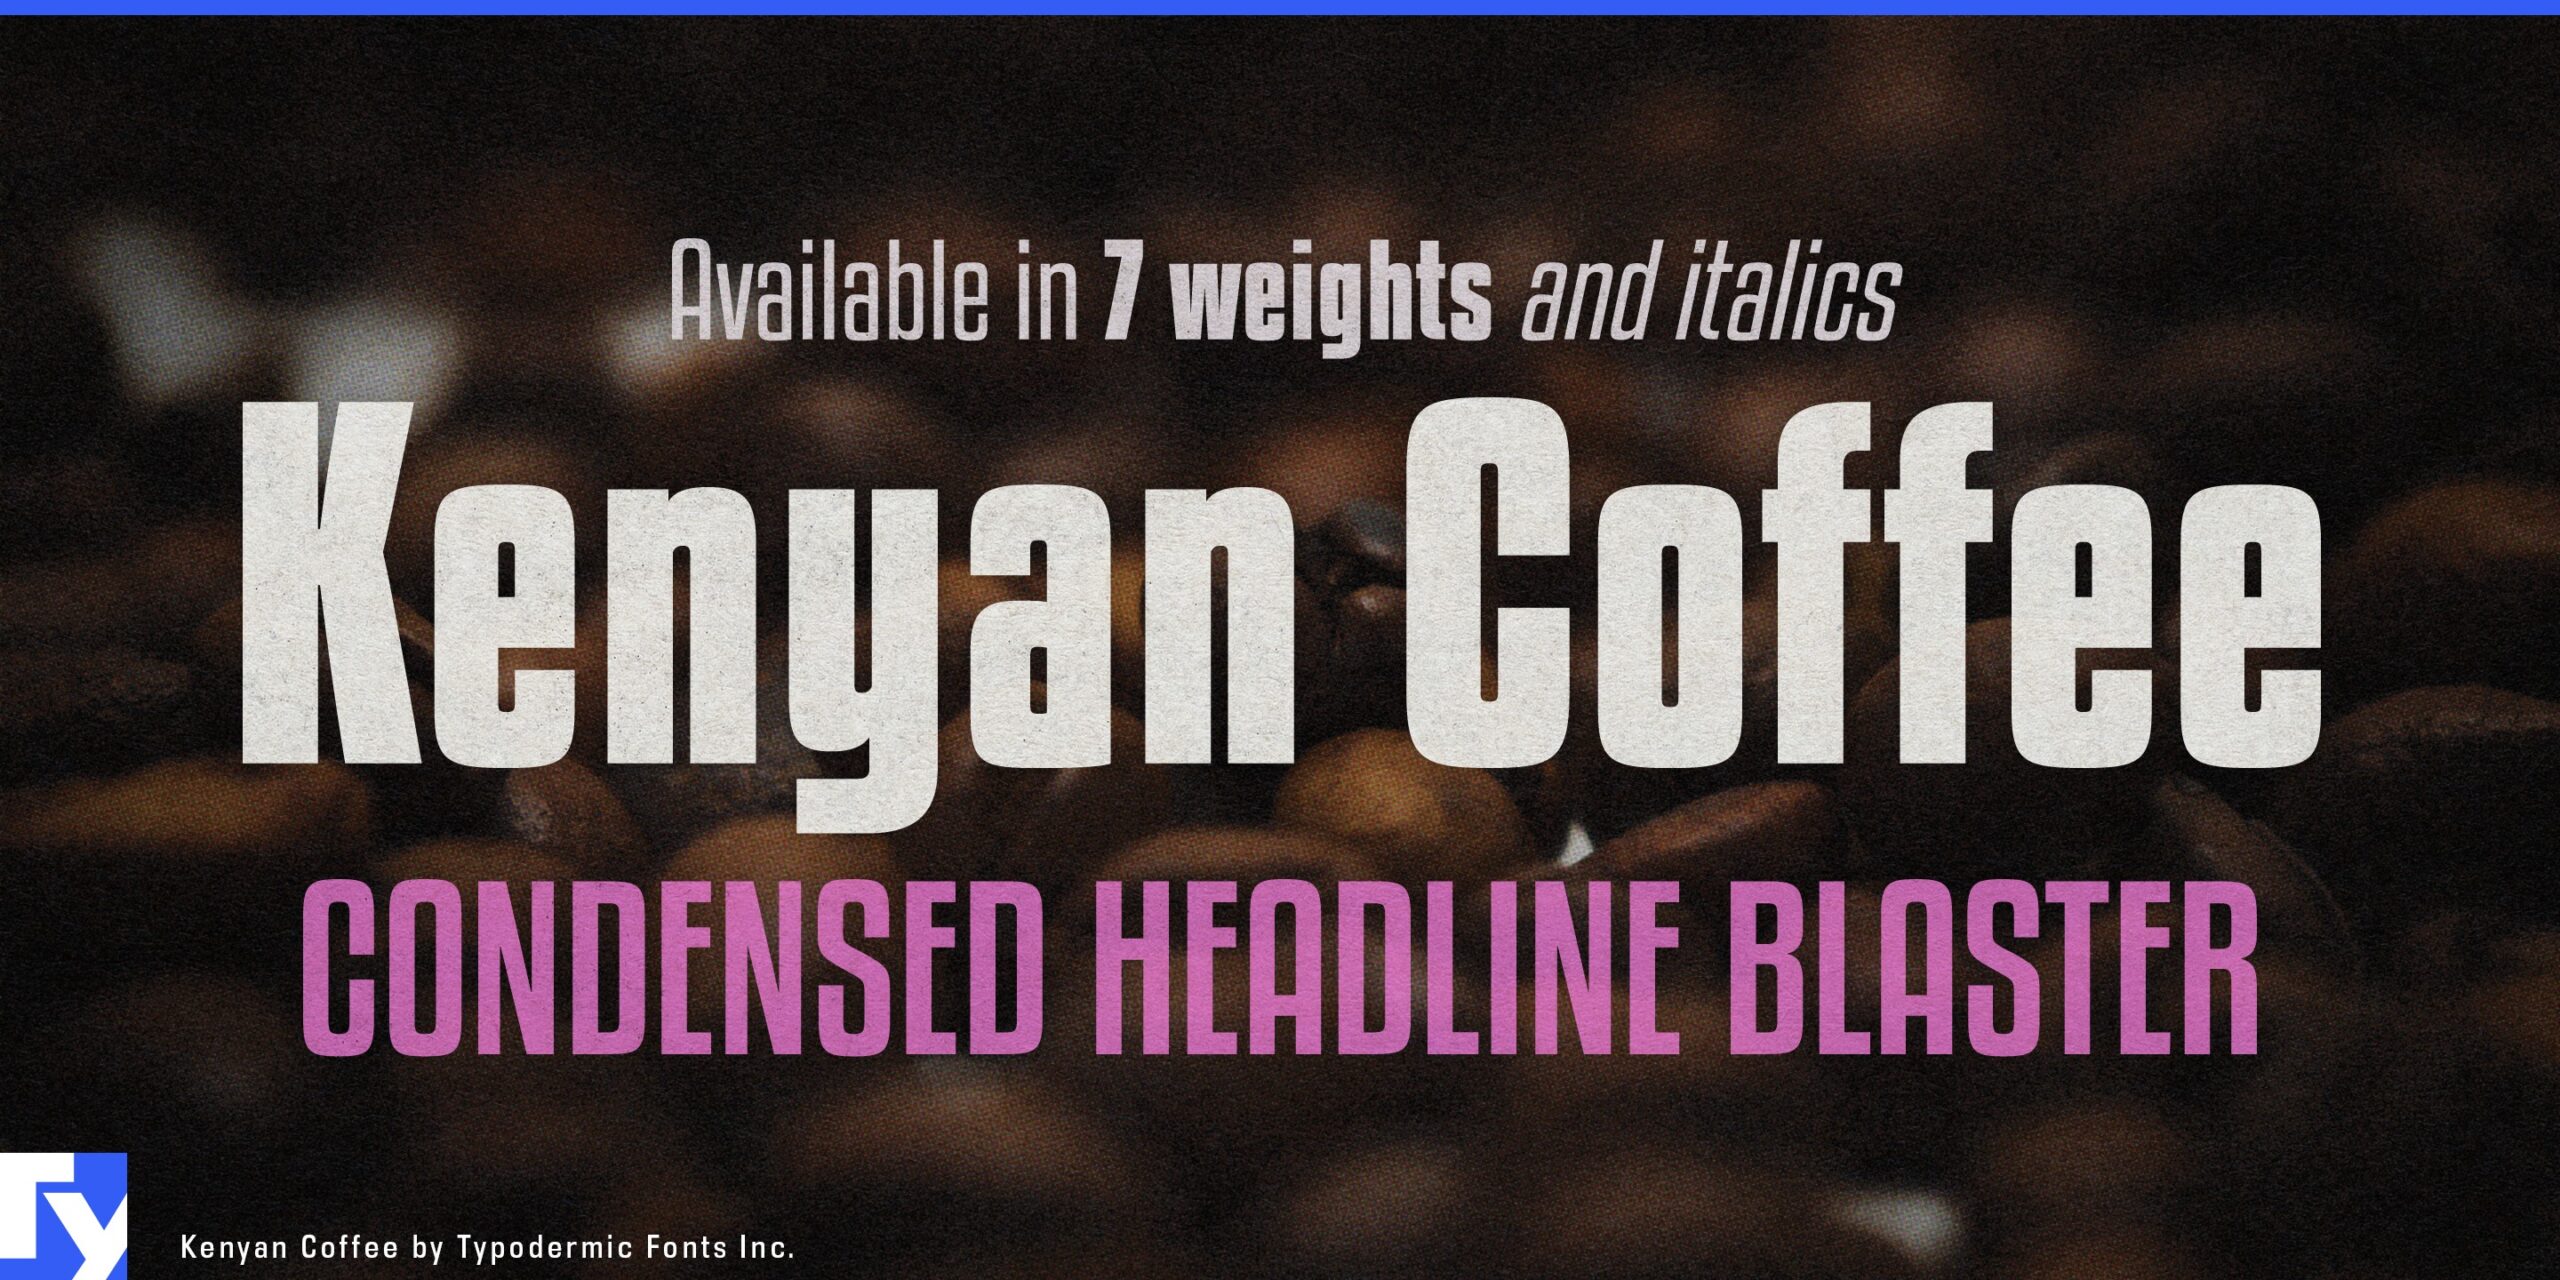 Industrial Elegance: Kenyan Coffee Typeface Adds Chic to Your Designs